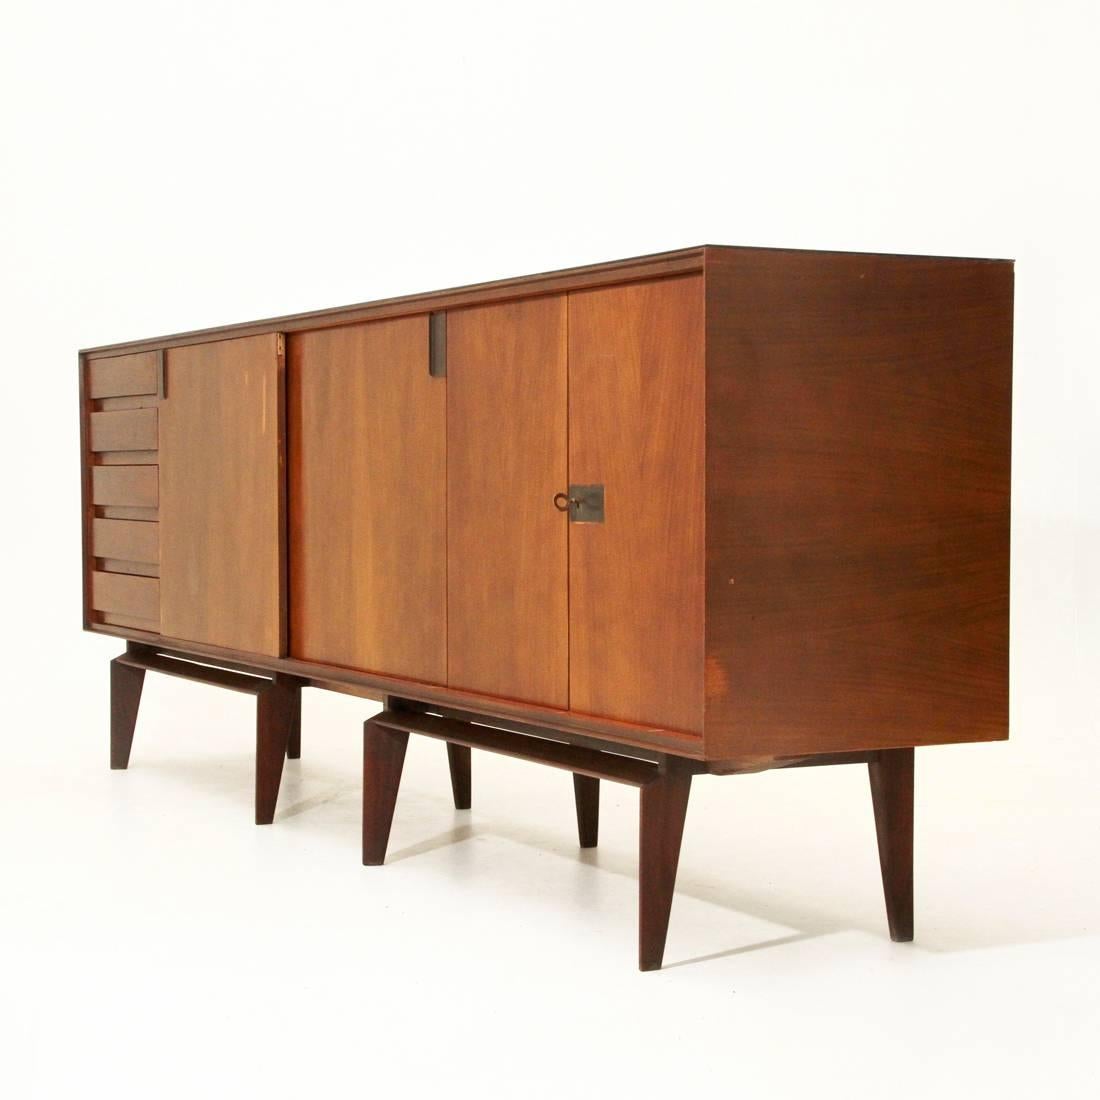 Sideboard produced by Dassi in the 1950s
Designed by Edmondo Palutari
Wooden rosewood veneered structure
Solid legs with brass details
Removable black glass top
Consisting of a chest of drawers and three compartments
Two with sliding doors and